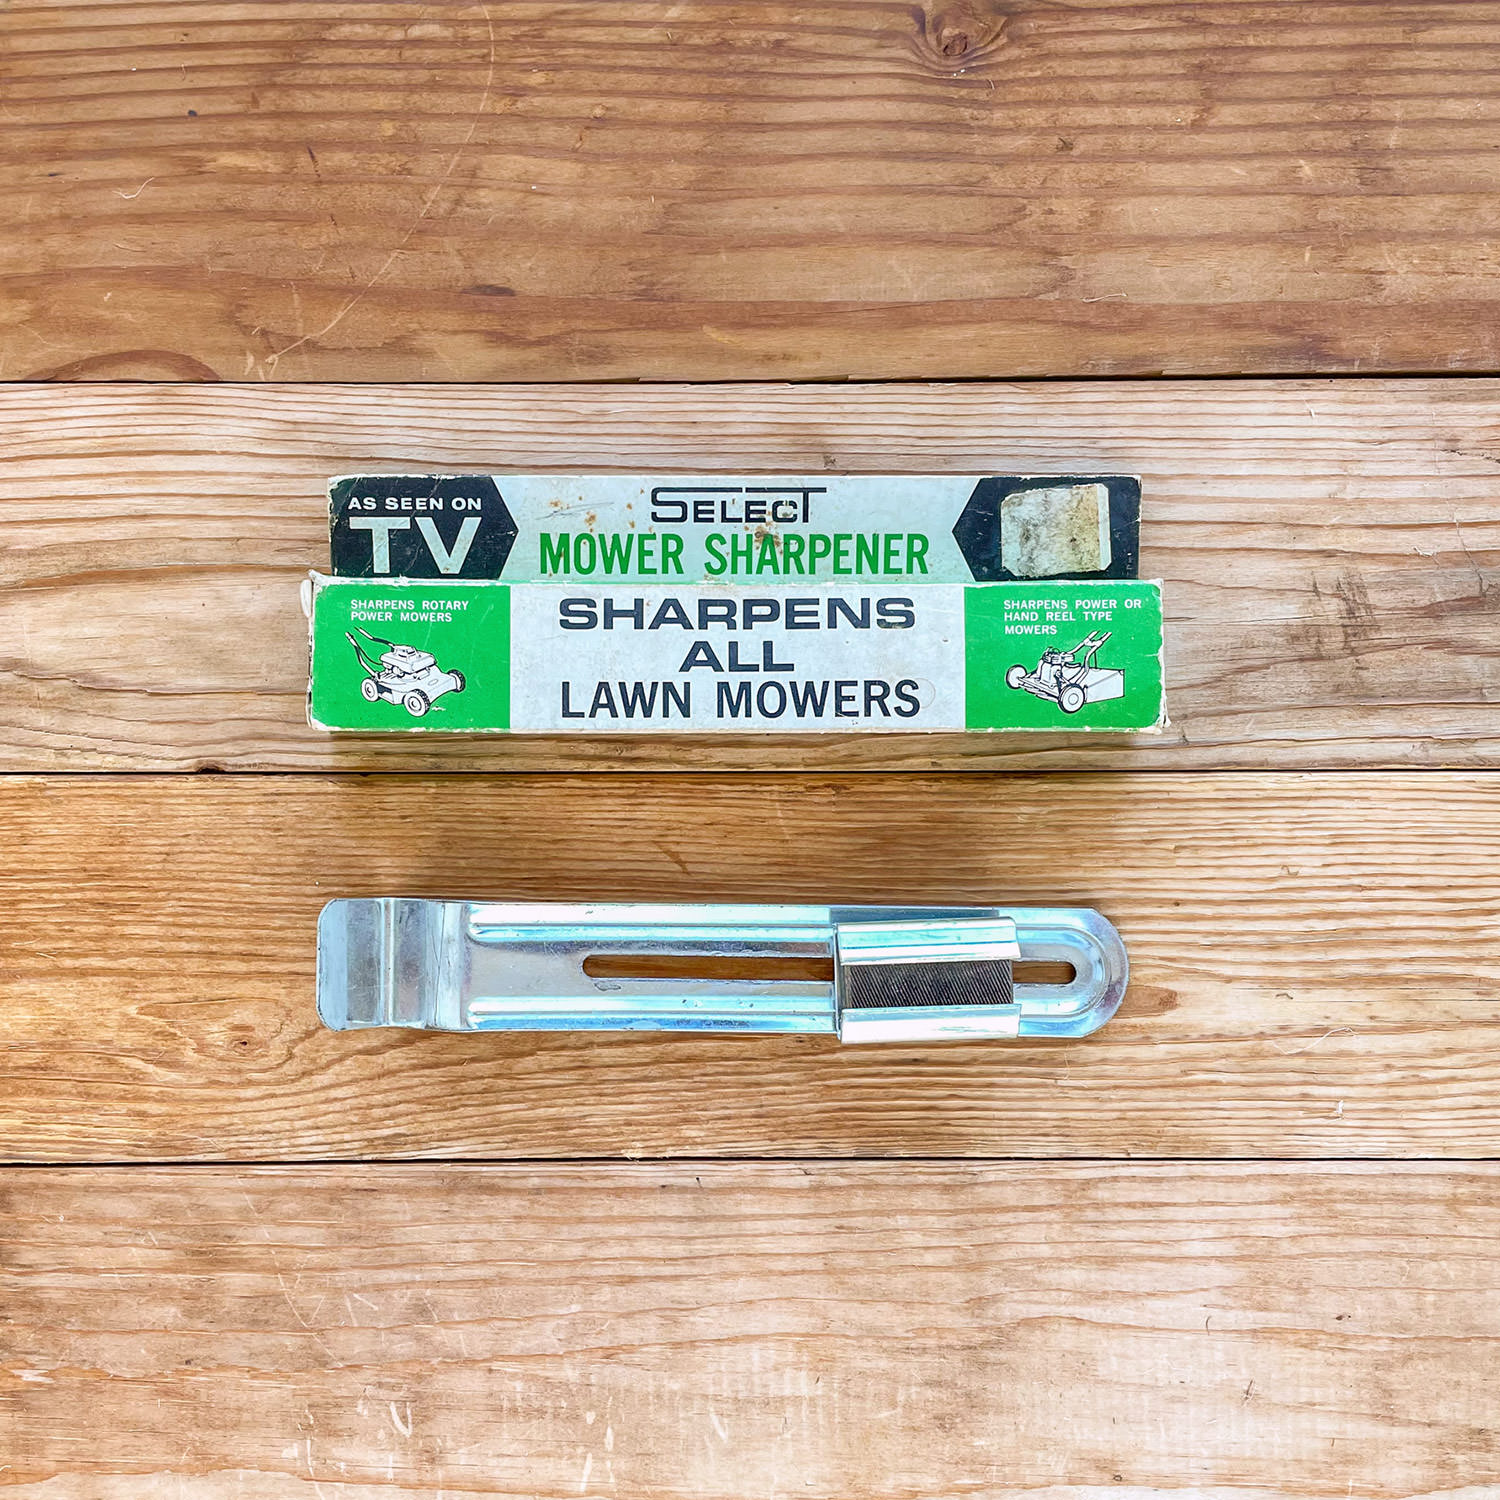 Select Mower Sharpener Sharpens All Lawn Mowers As Seen on TV